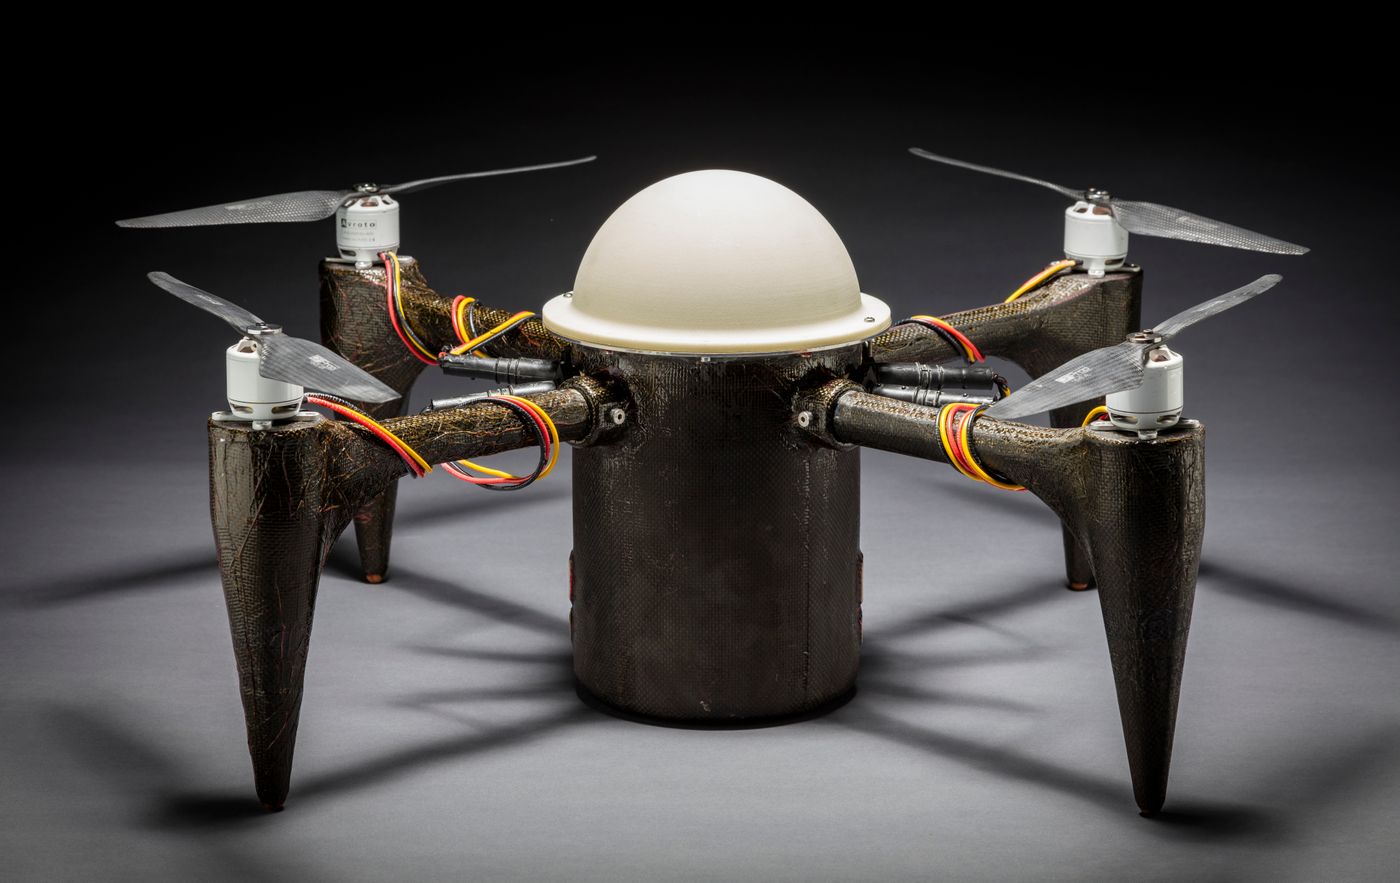 Researchers at John Hopkins University have created a drone that can tackle water as well as air.